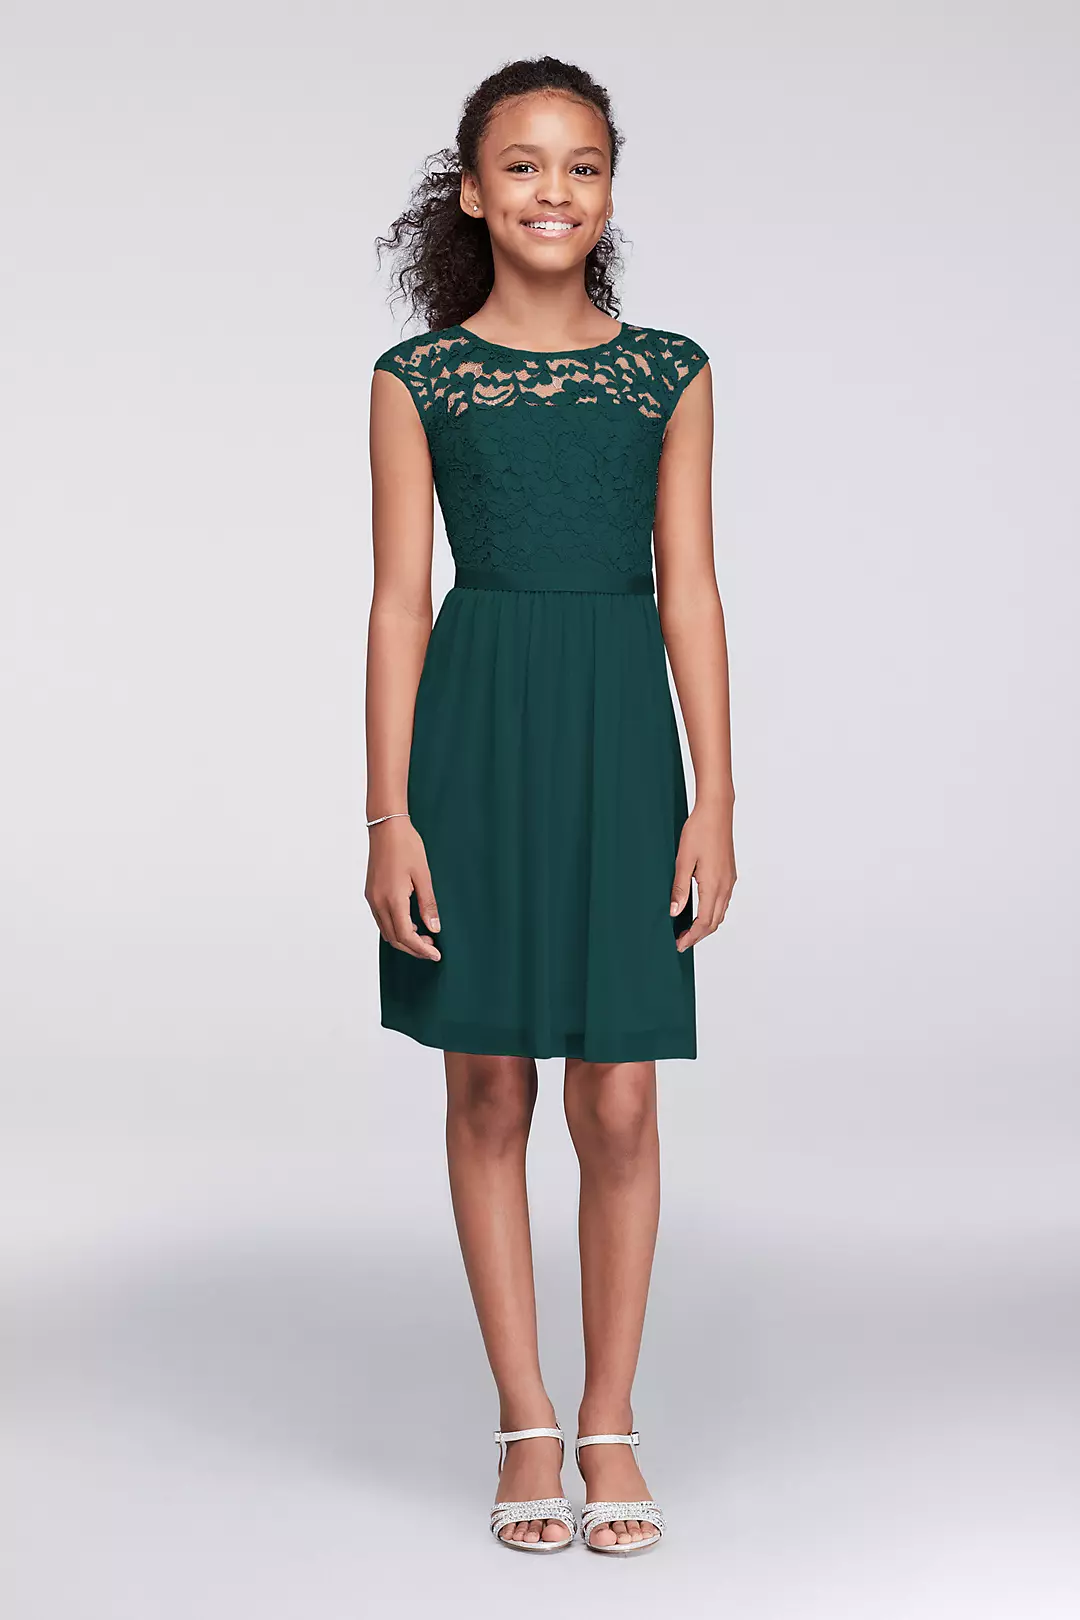 Cap Sleeve Lace and Mesh Girls Dress Image